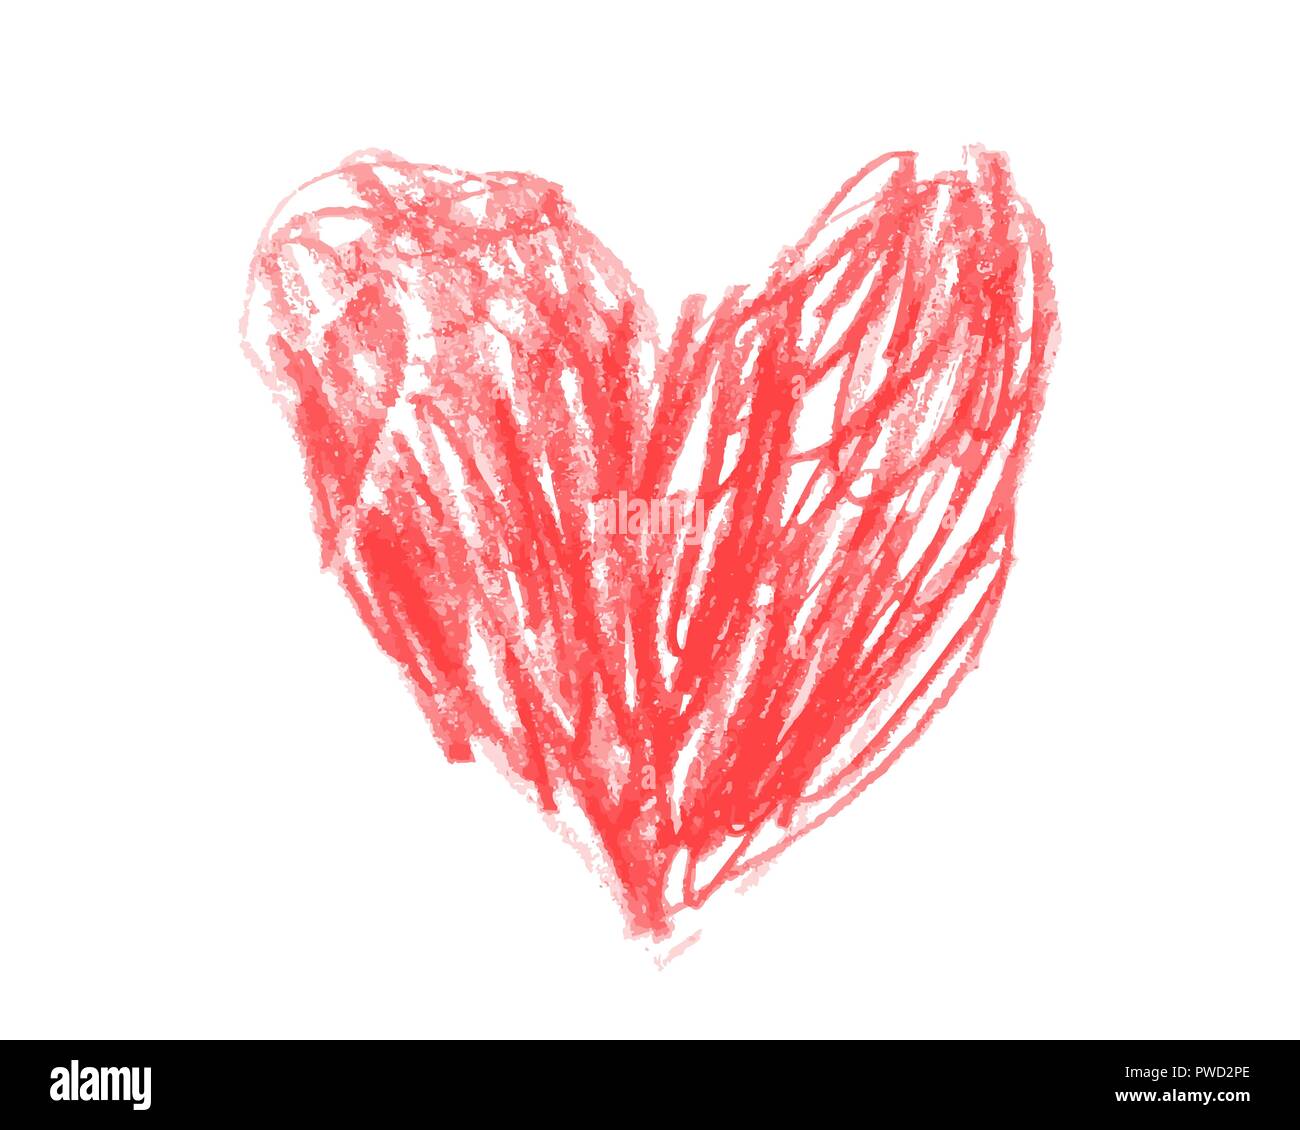 Heart drawing for kids